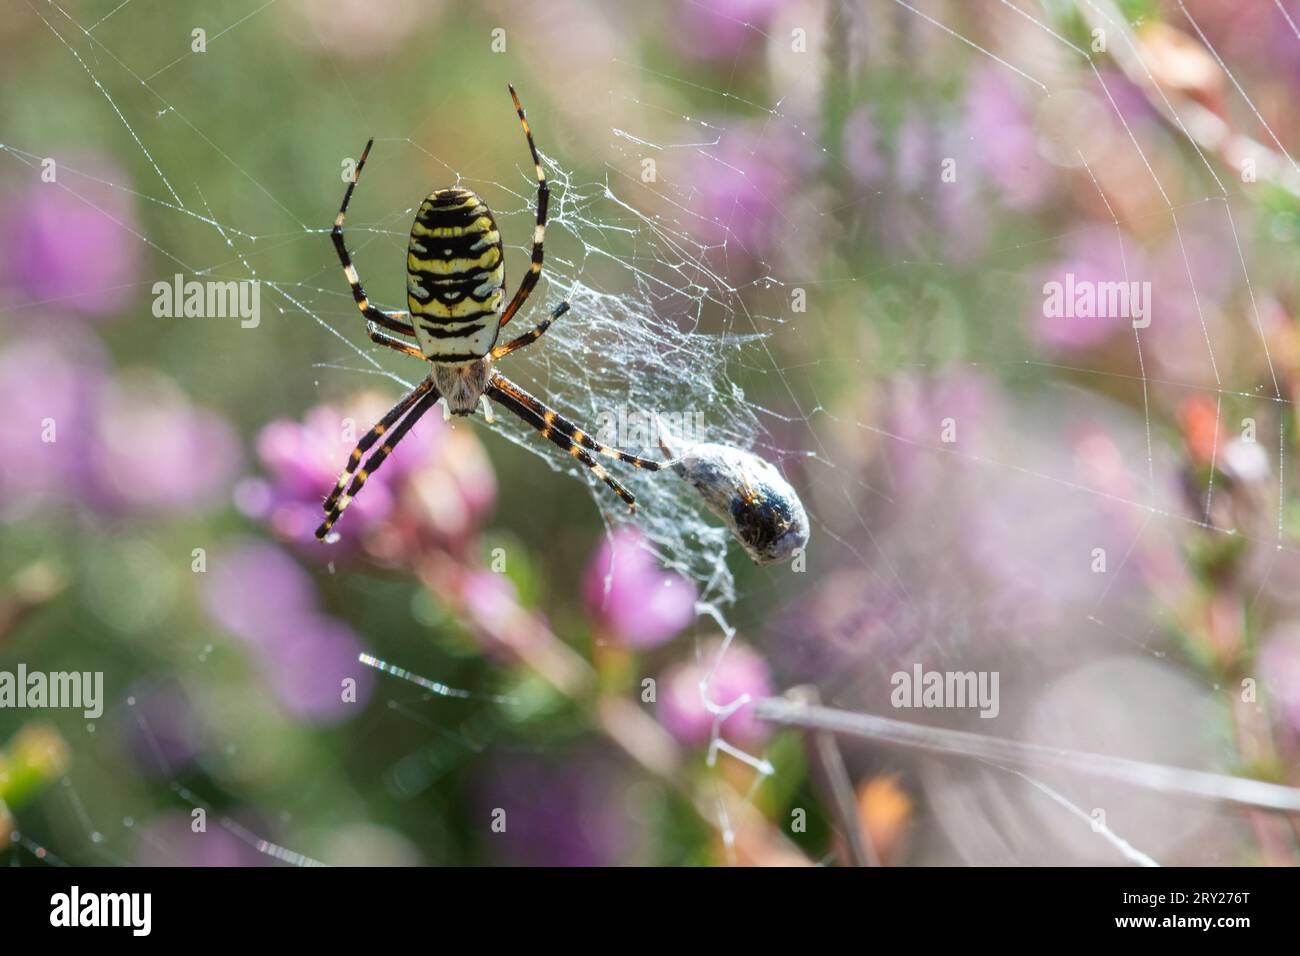 Wasp spider (Argiope bruennichi), a species of orb-web spiders with black, yellow and white stripes, Surrey, England, UK Stock Photo